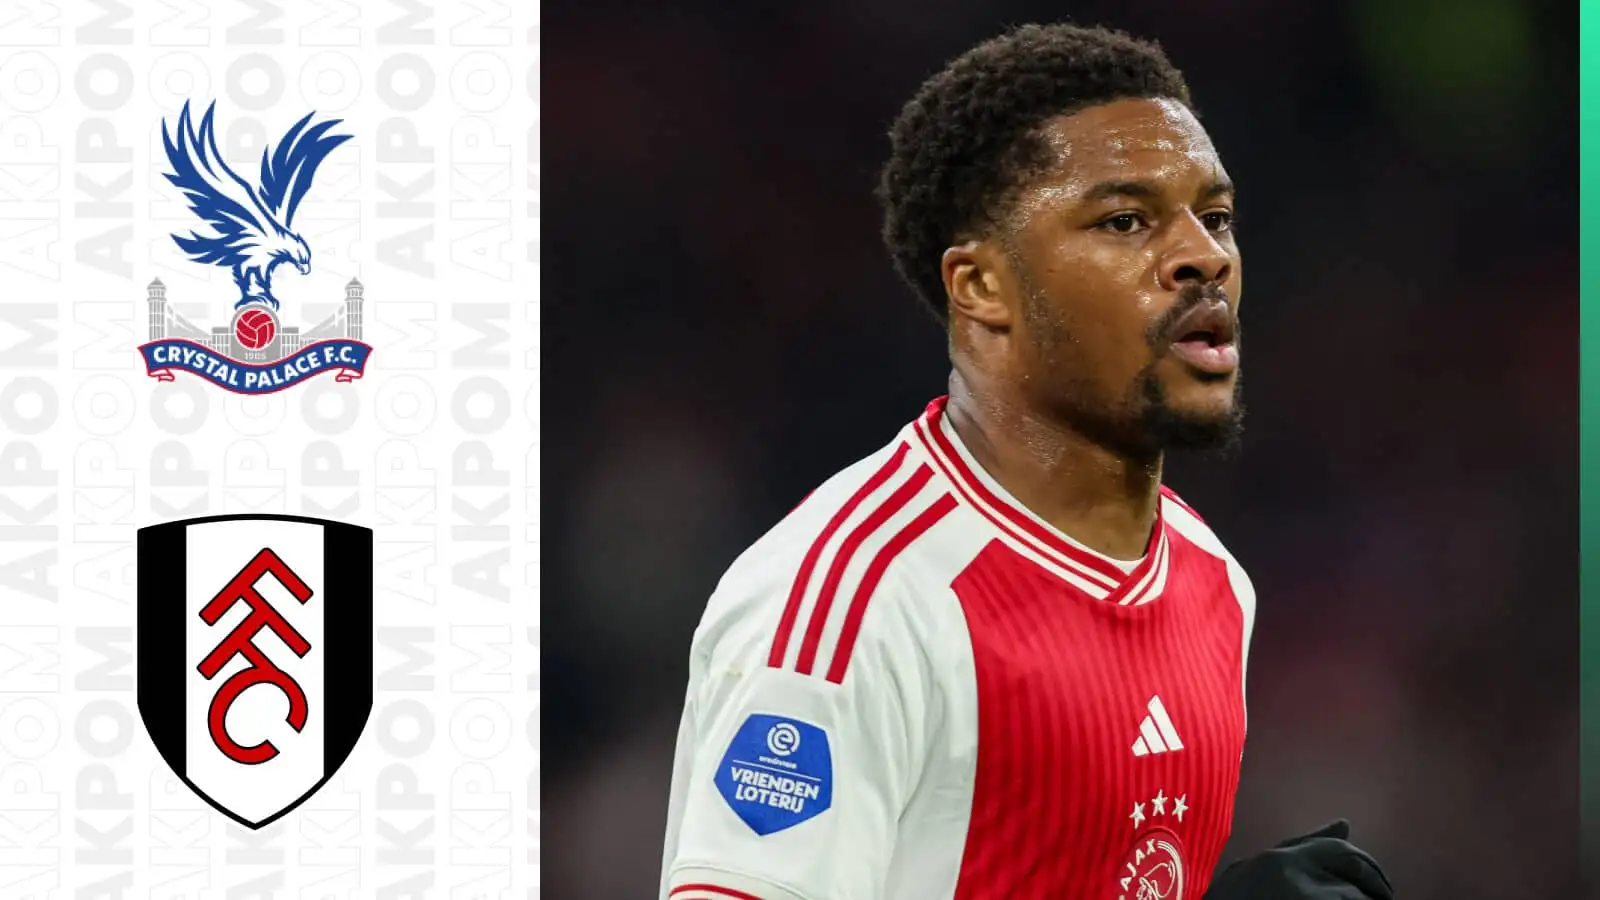 Ajax striker Chuba Akpom next to the Crystal Palace and Fulham badges